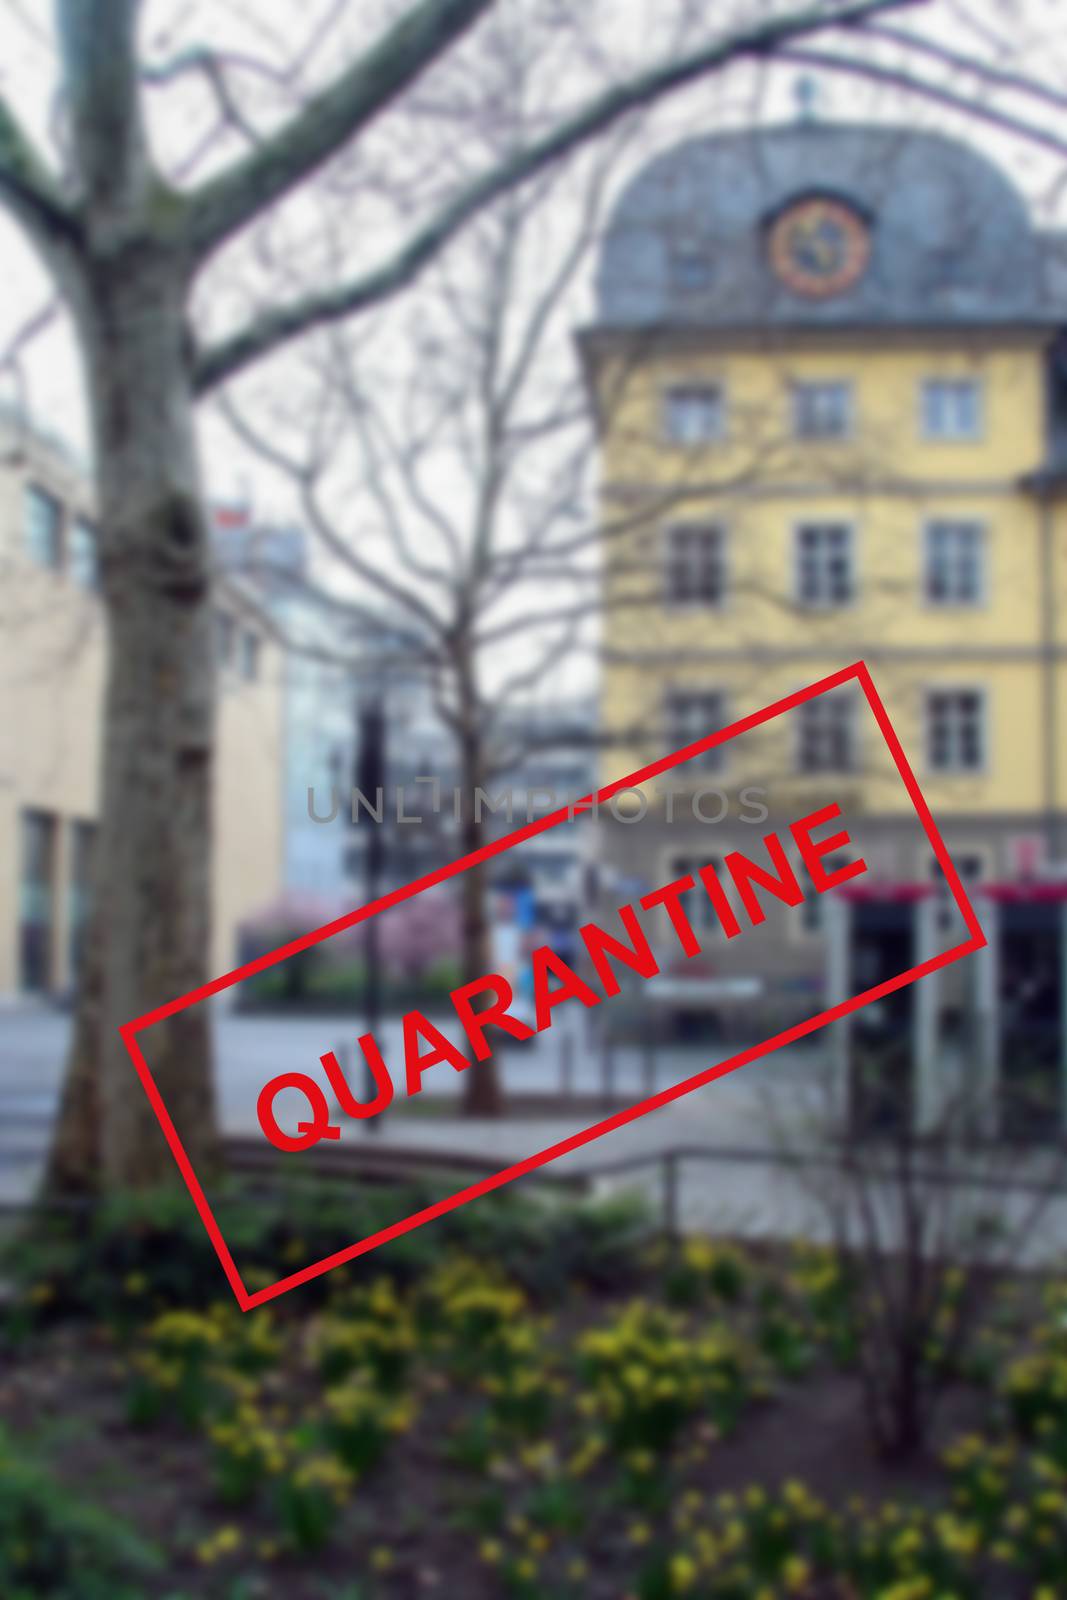 Coronavirus quarantine in Europe. Text against the background of spring city streets in Bonn in Germany. Concept of the economy and financial markets affected by the coronavirus outbreak and fears of a pandemic.